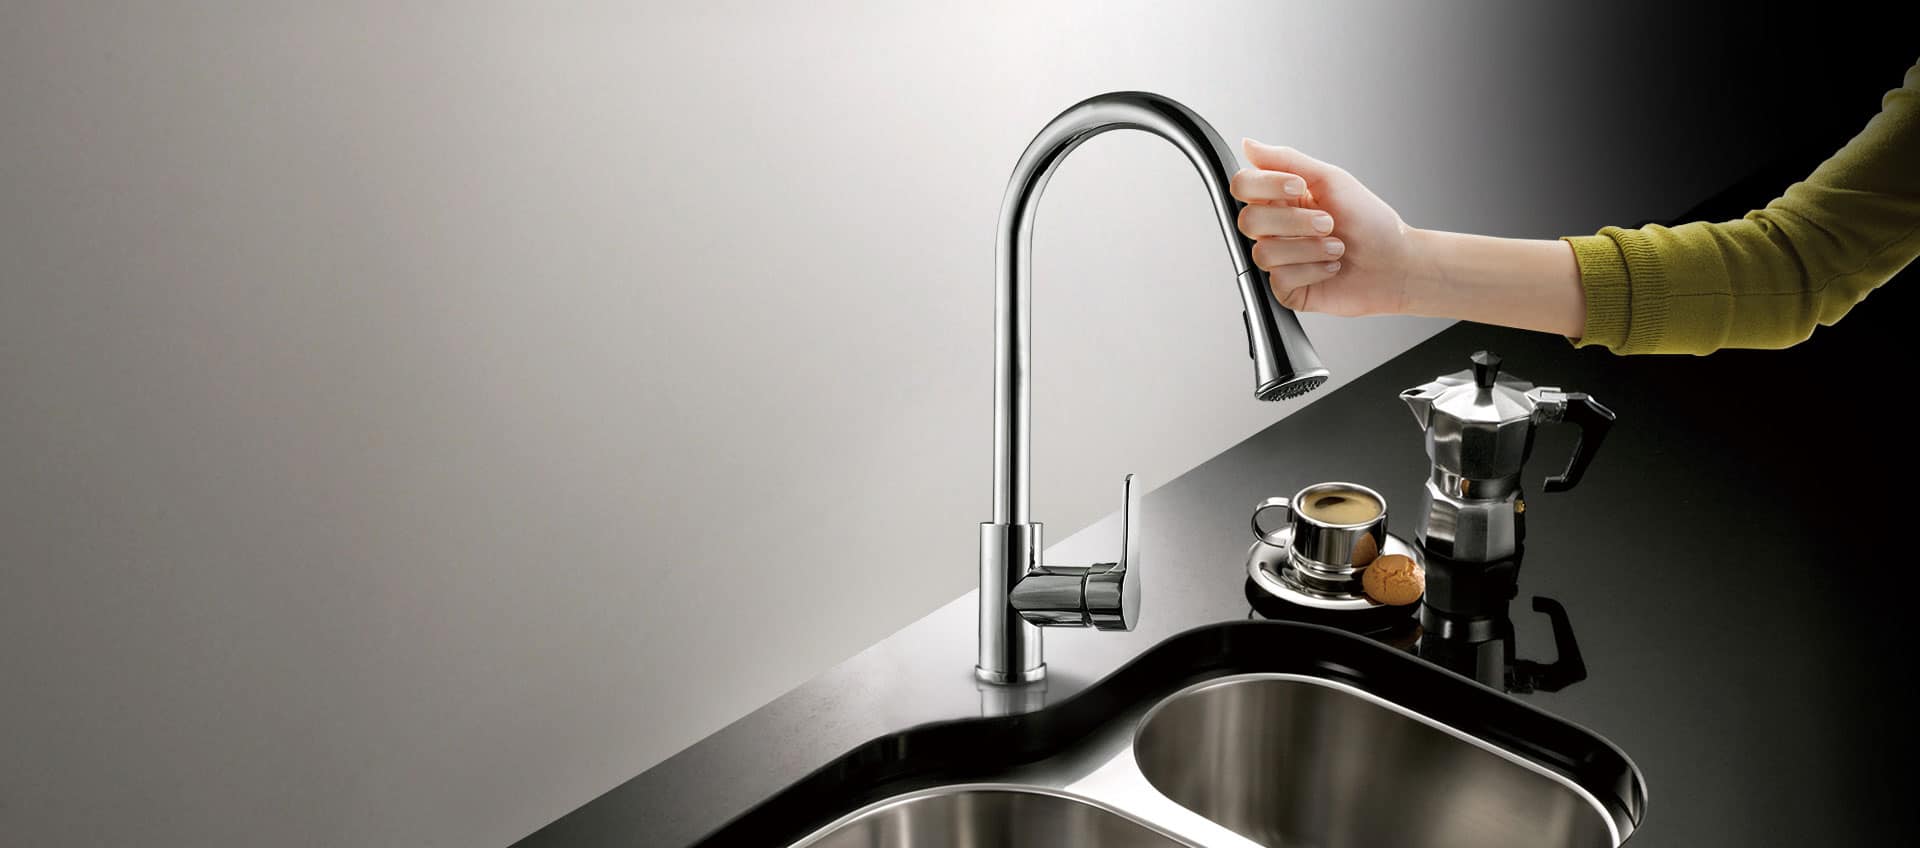 sensor touch kitchen sink faucet pull down